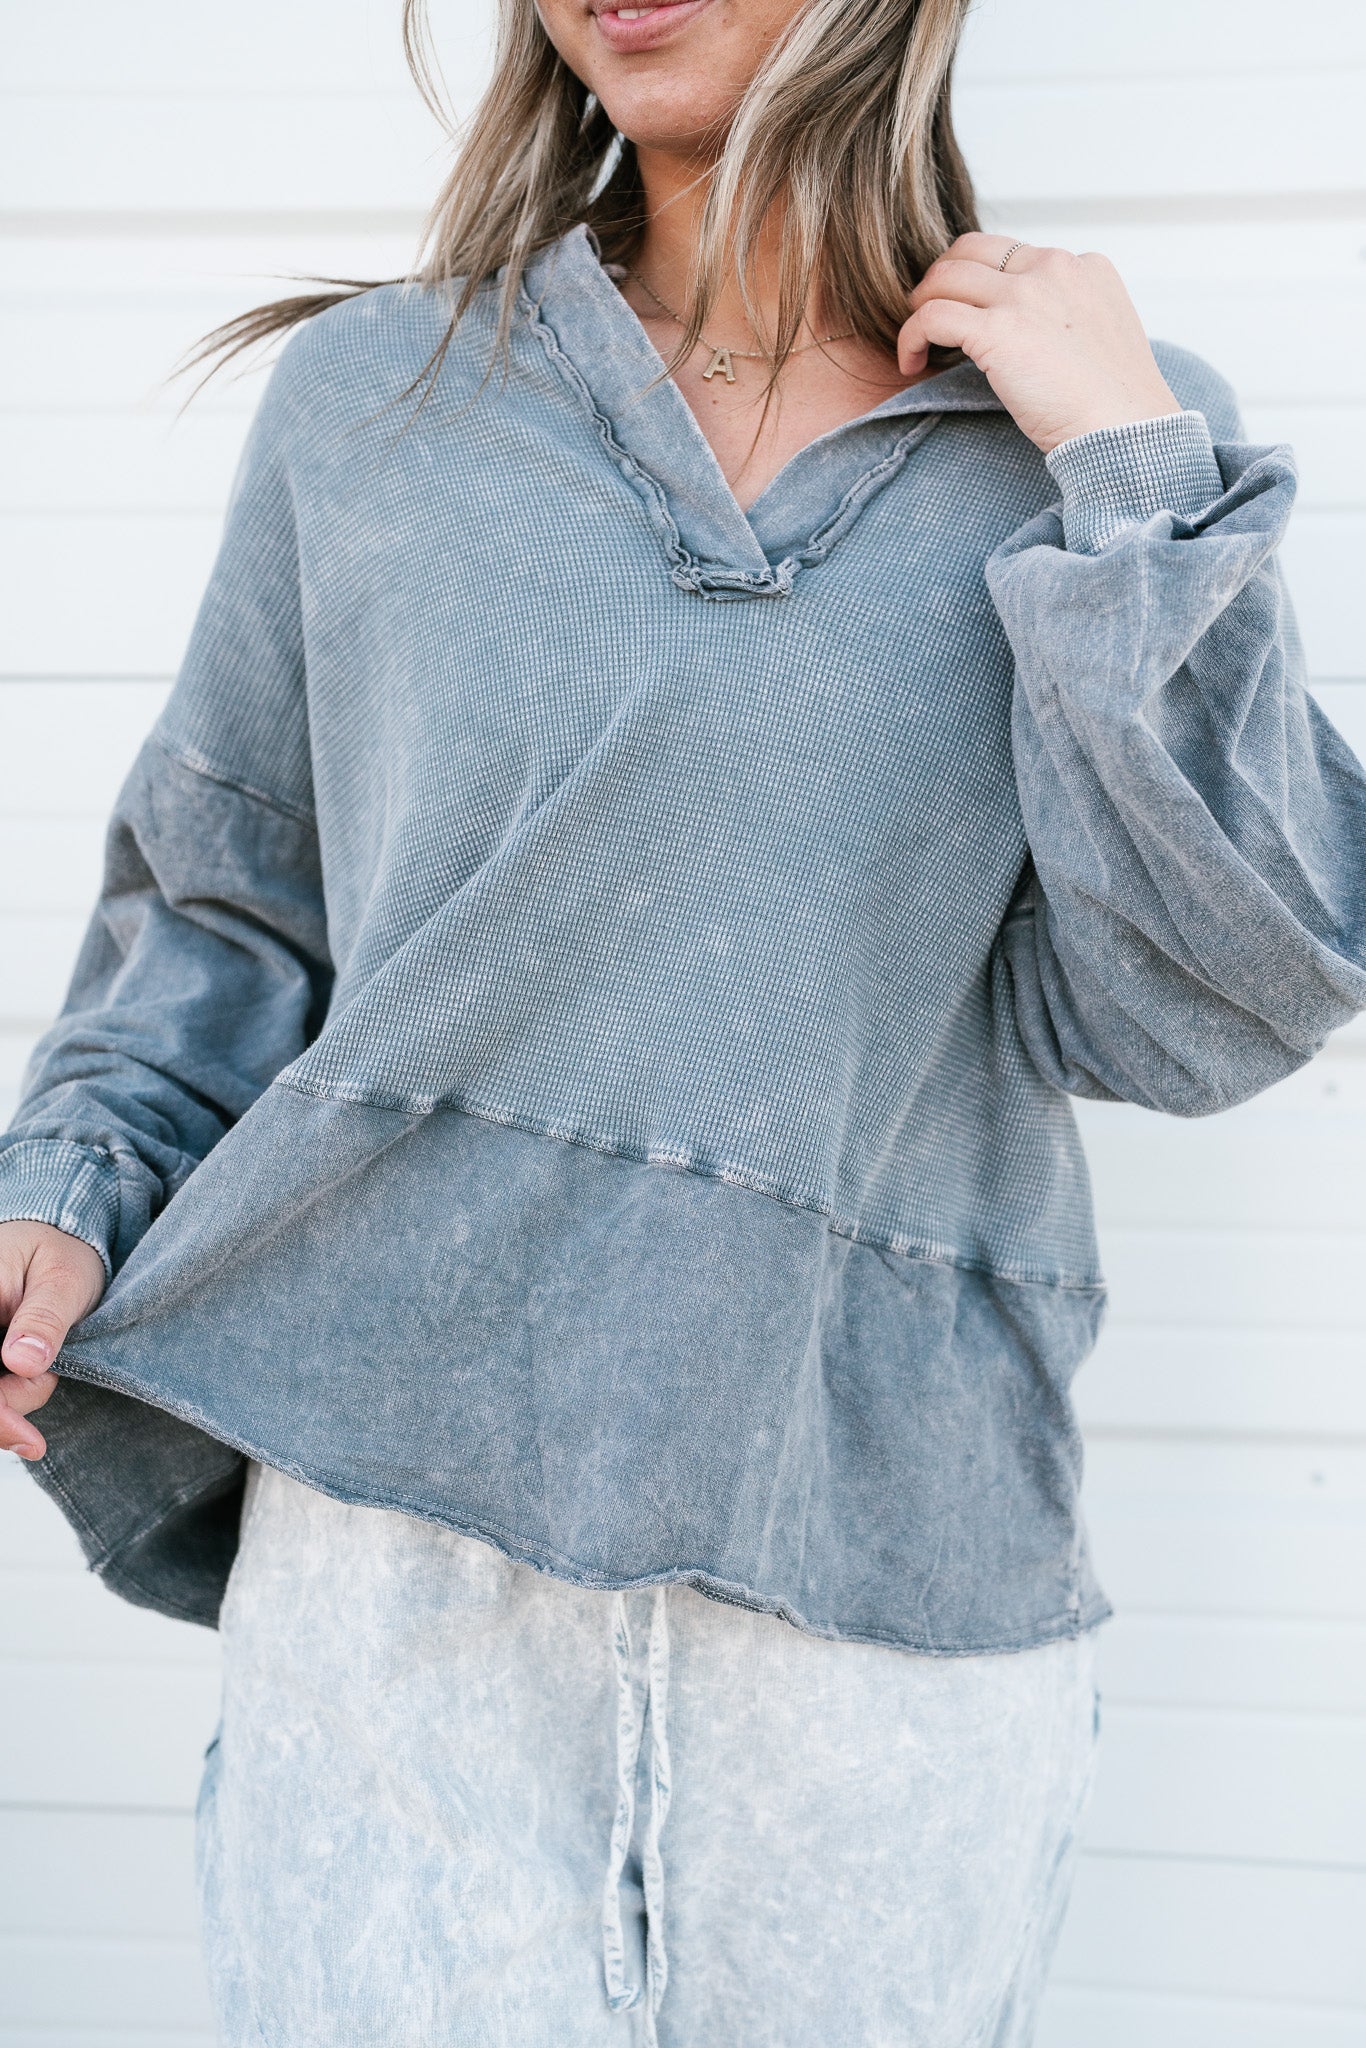 Classic Comfort Waffle Knit Top